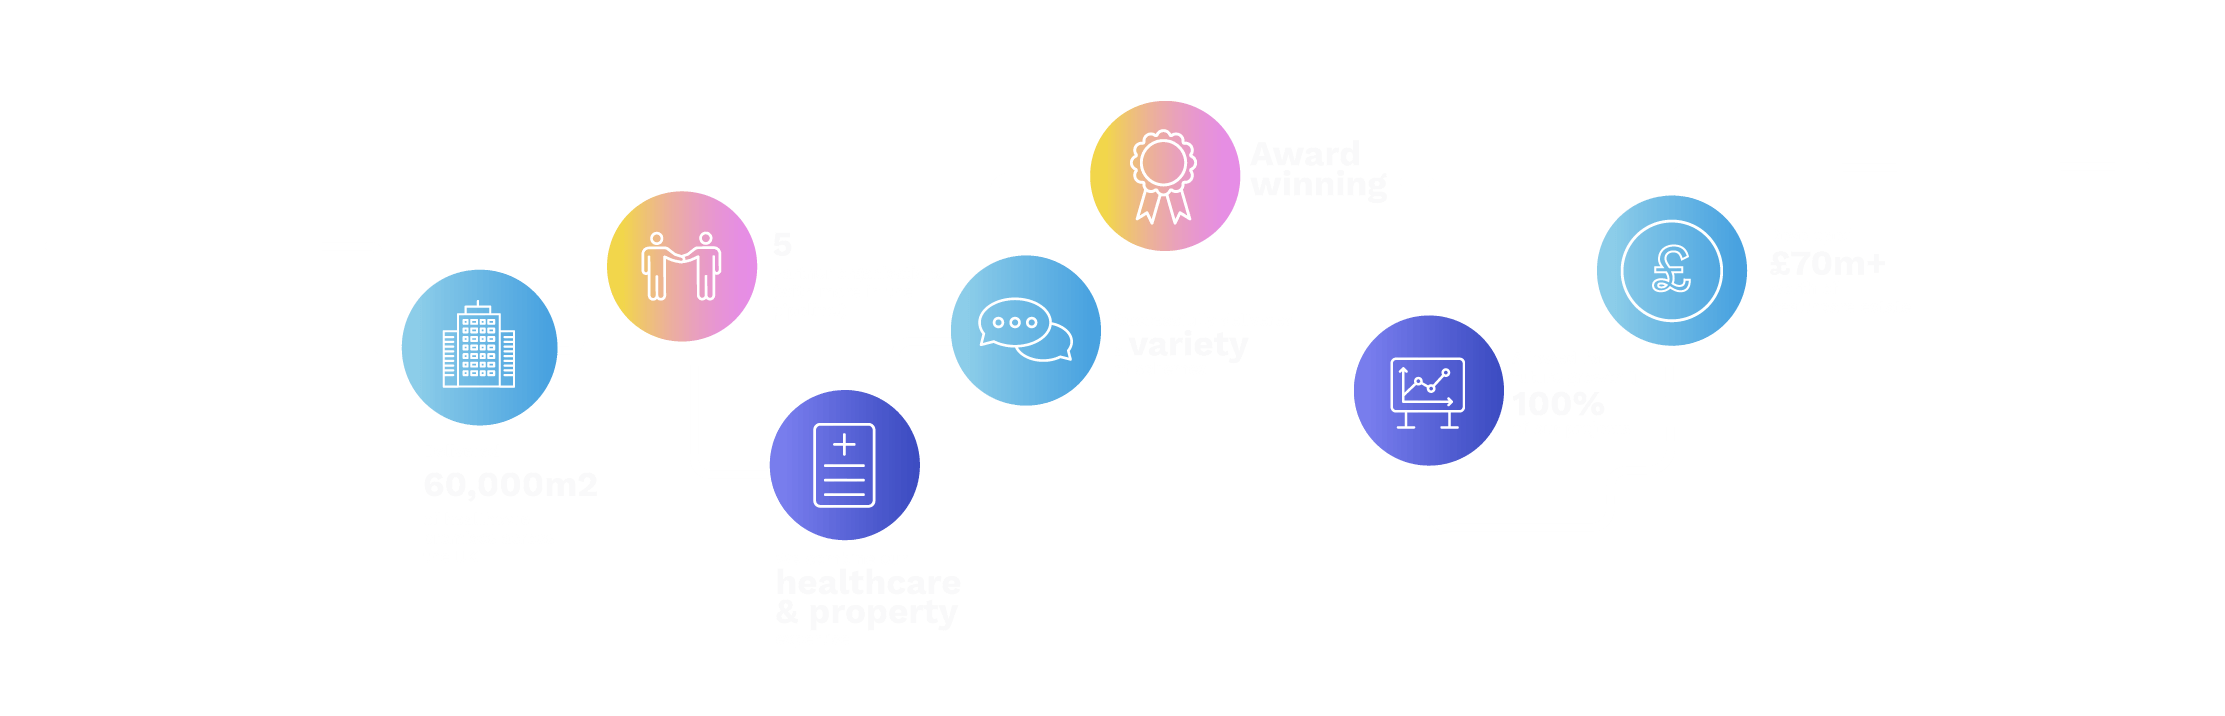 Delivered 60,000m2 of healthcare premises across the UK; 5 Partner organisations (with more in the pipeline!); We combine our healthcare & property expertise; Successfully delivered a variety of schemes; Award winning; Allowed for future growth in 100% of our projects; Delivered £70m+ worth of healthcare estate